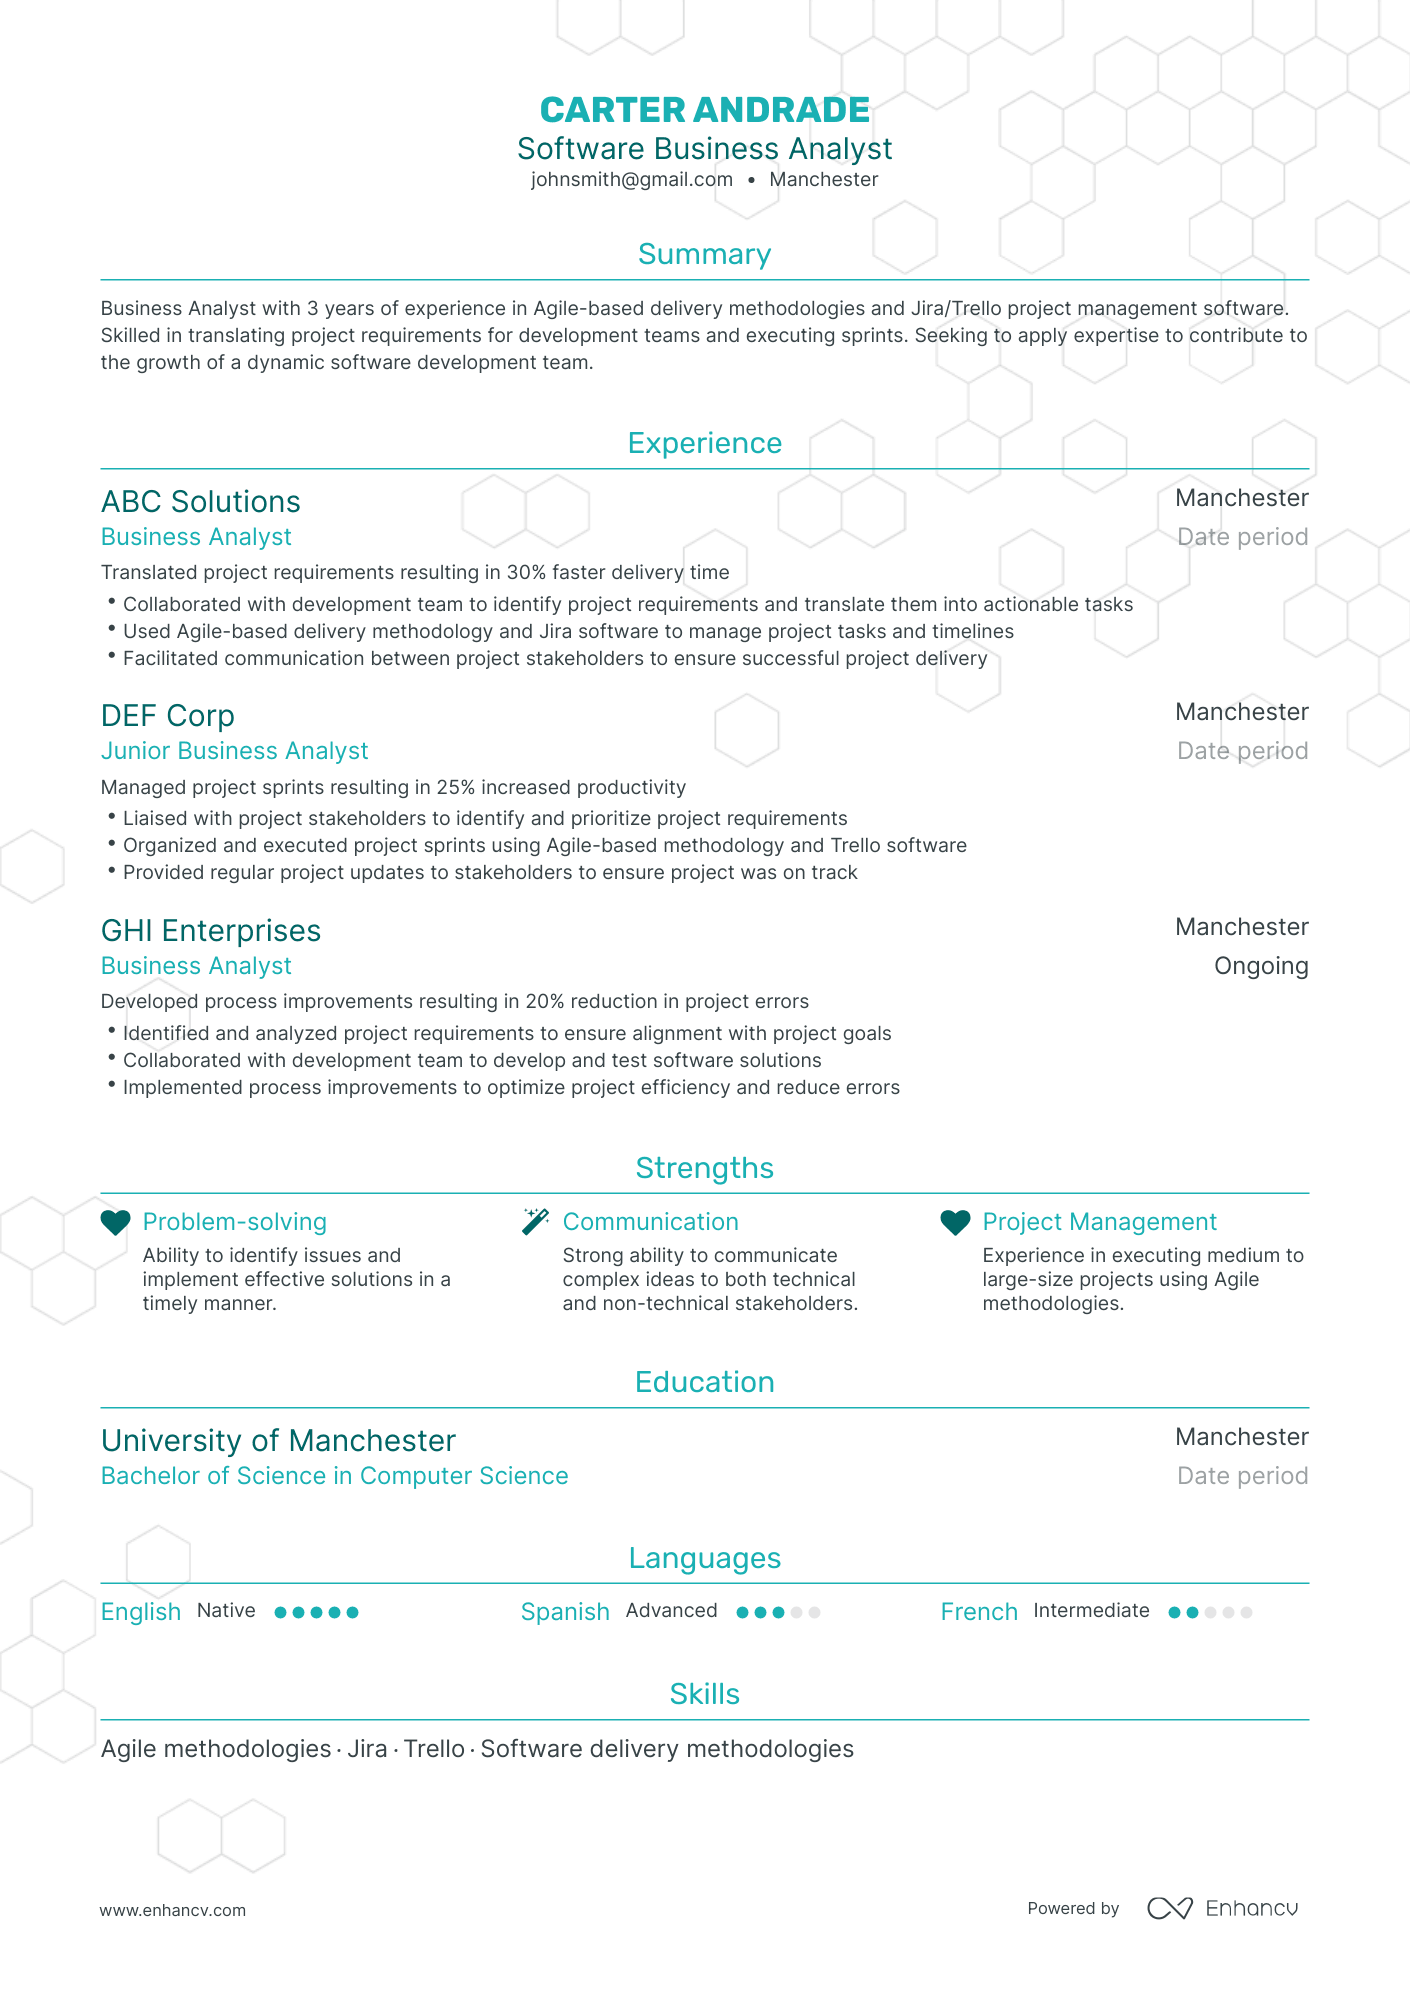 Traditional Software Business Analyst Resume Template